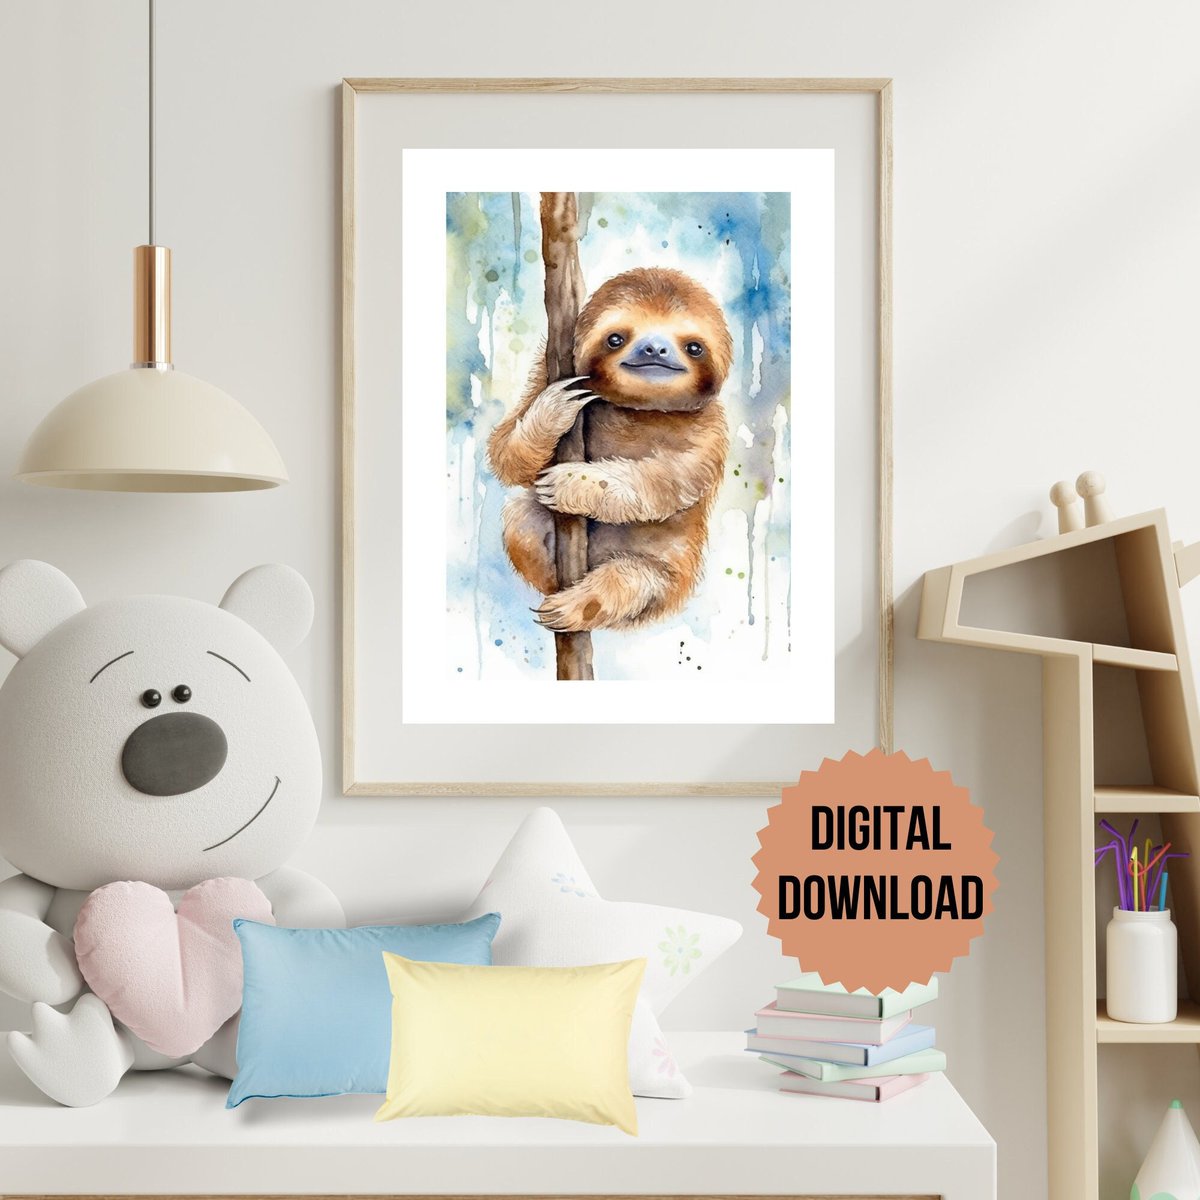 Excited to share the latest addition to my #etsy shop: Watercolor Sloth Printable, Sloth Nursery Decor, Sloth Prints, Nursery Wall Art, Nursery Decor Boy, Nursery Decor Girl etsy.me/42d6NJG #unframed #bedroom #animal #watercolorsloth #slothlovers #cutesloth #wa